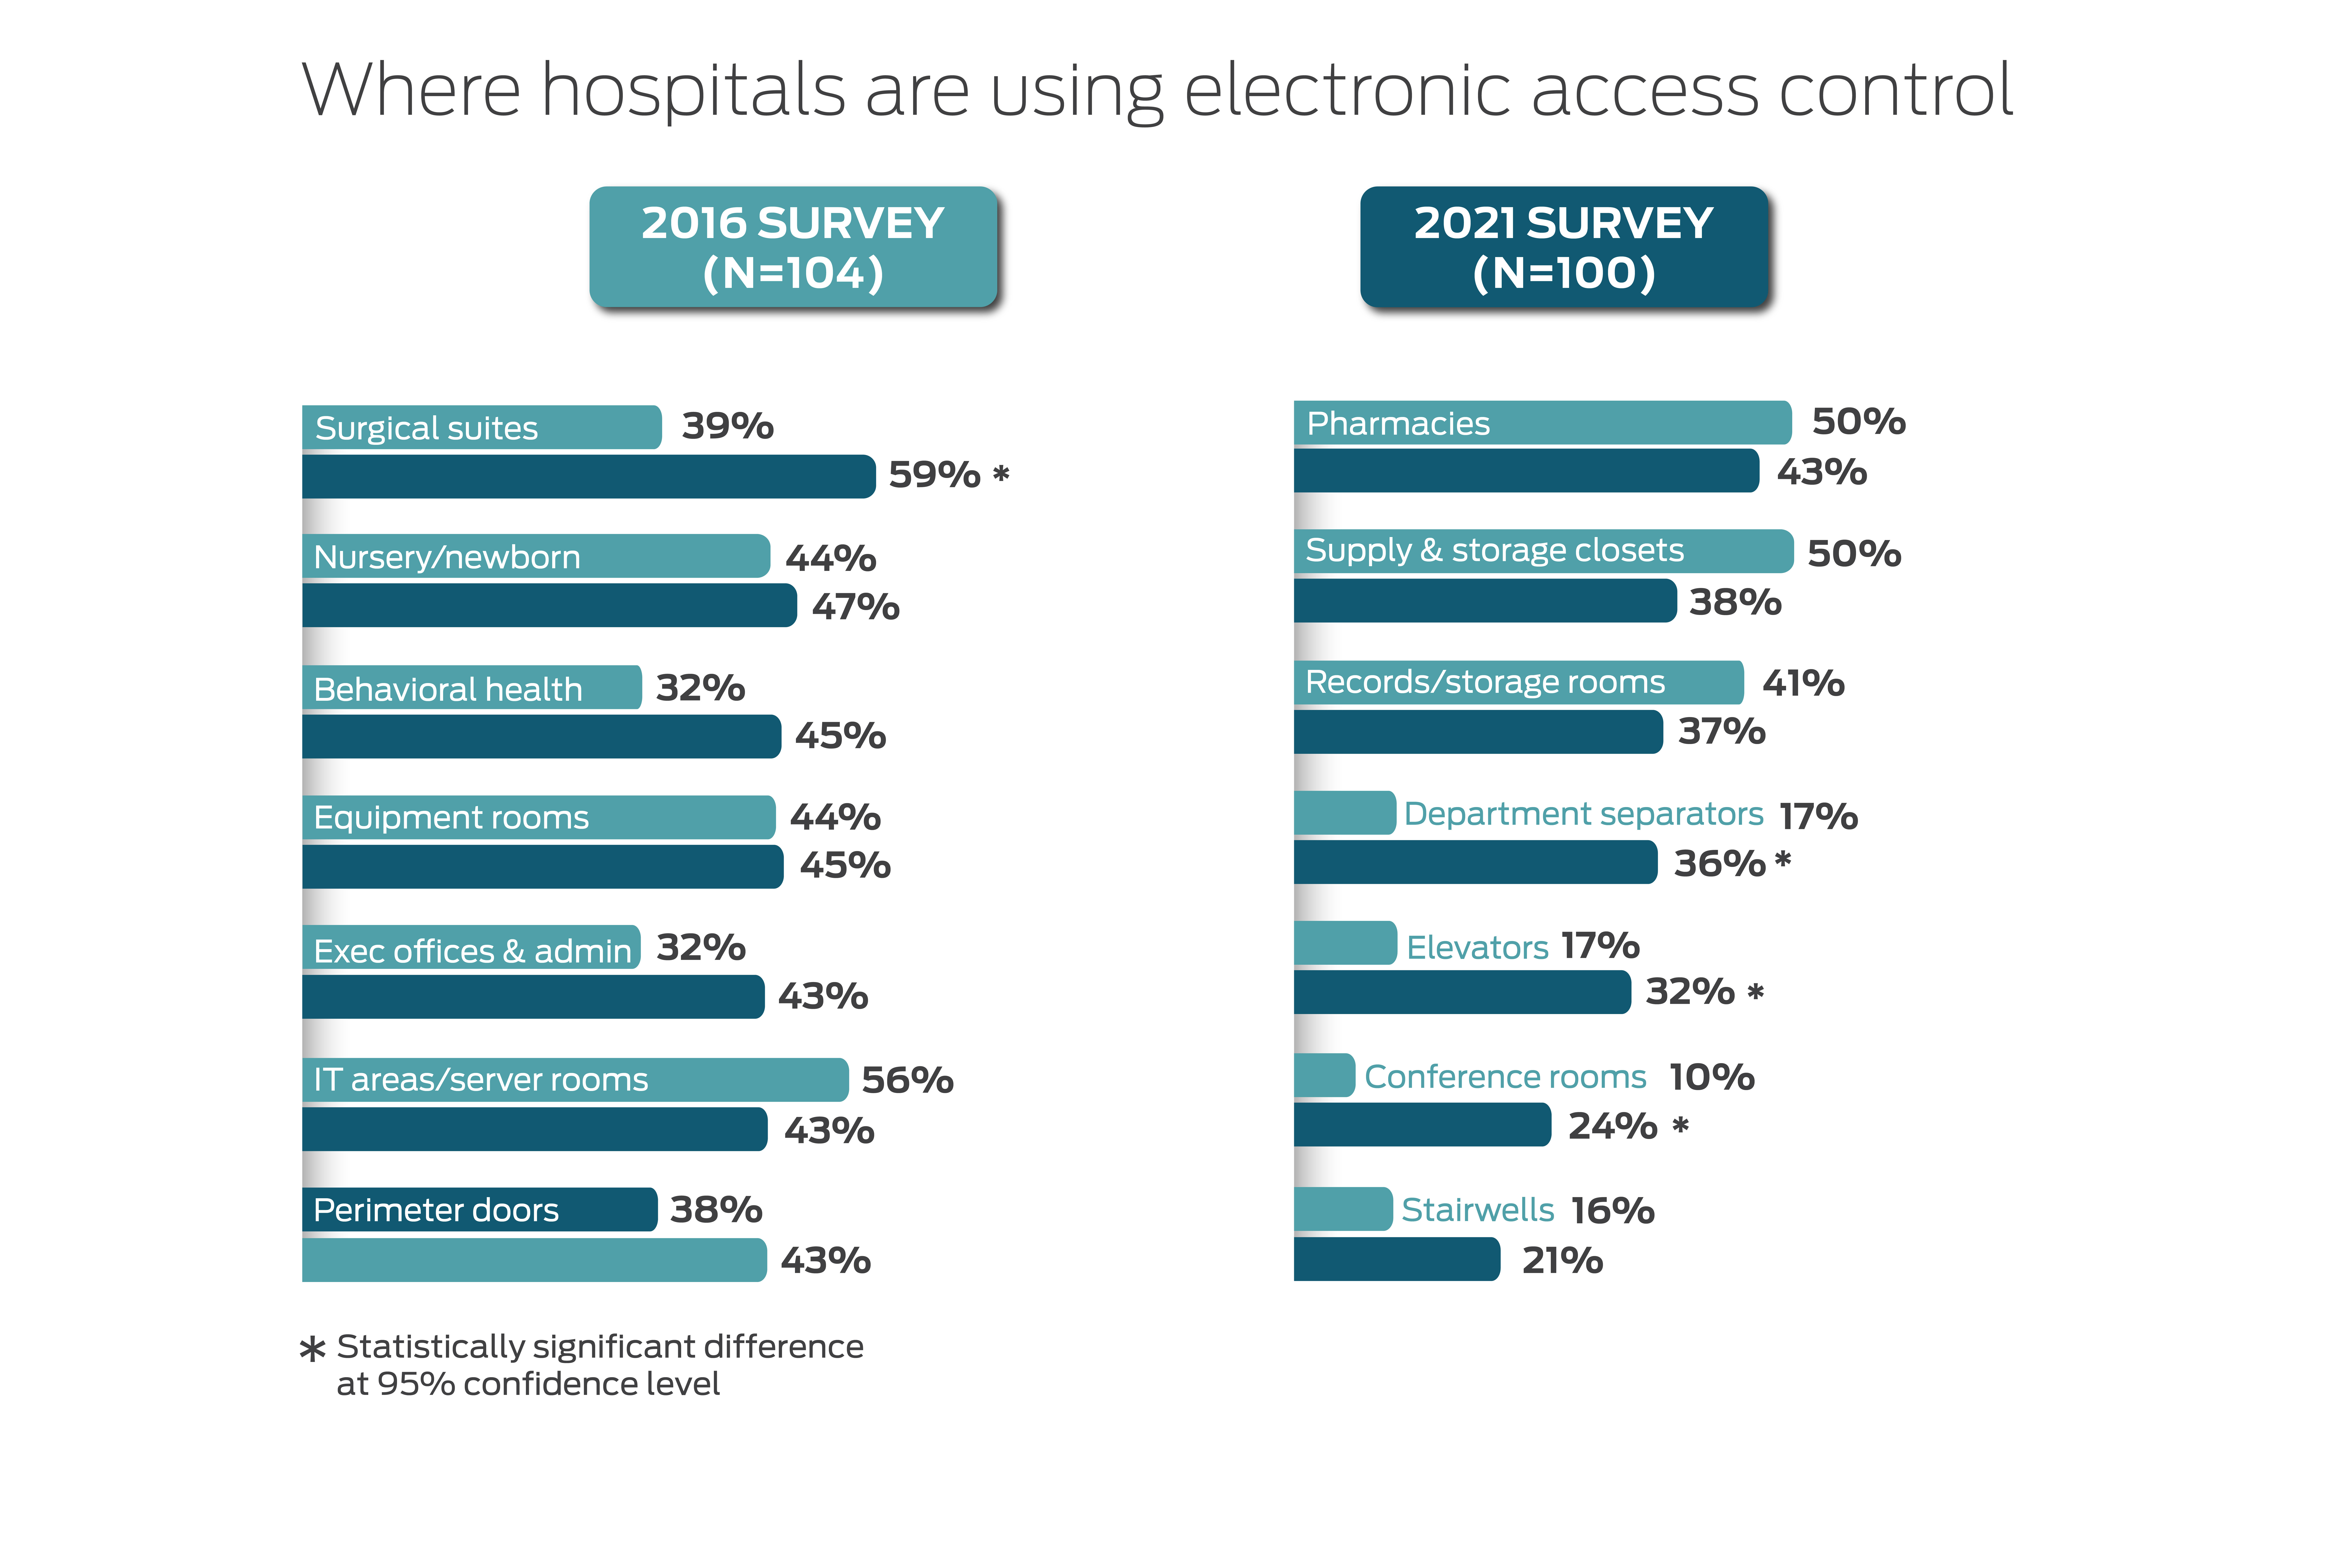 health care trends and changes - electronic access control